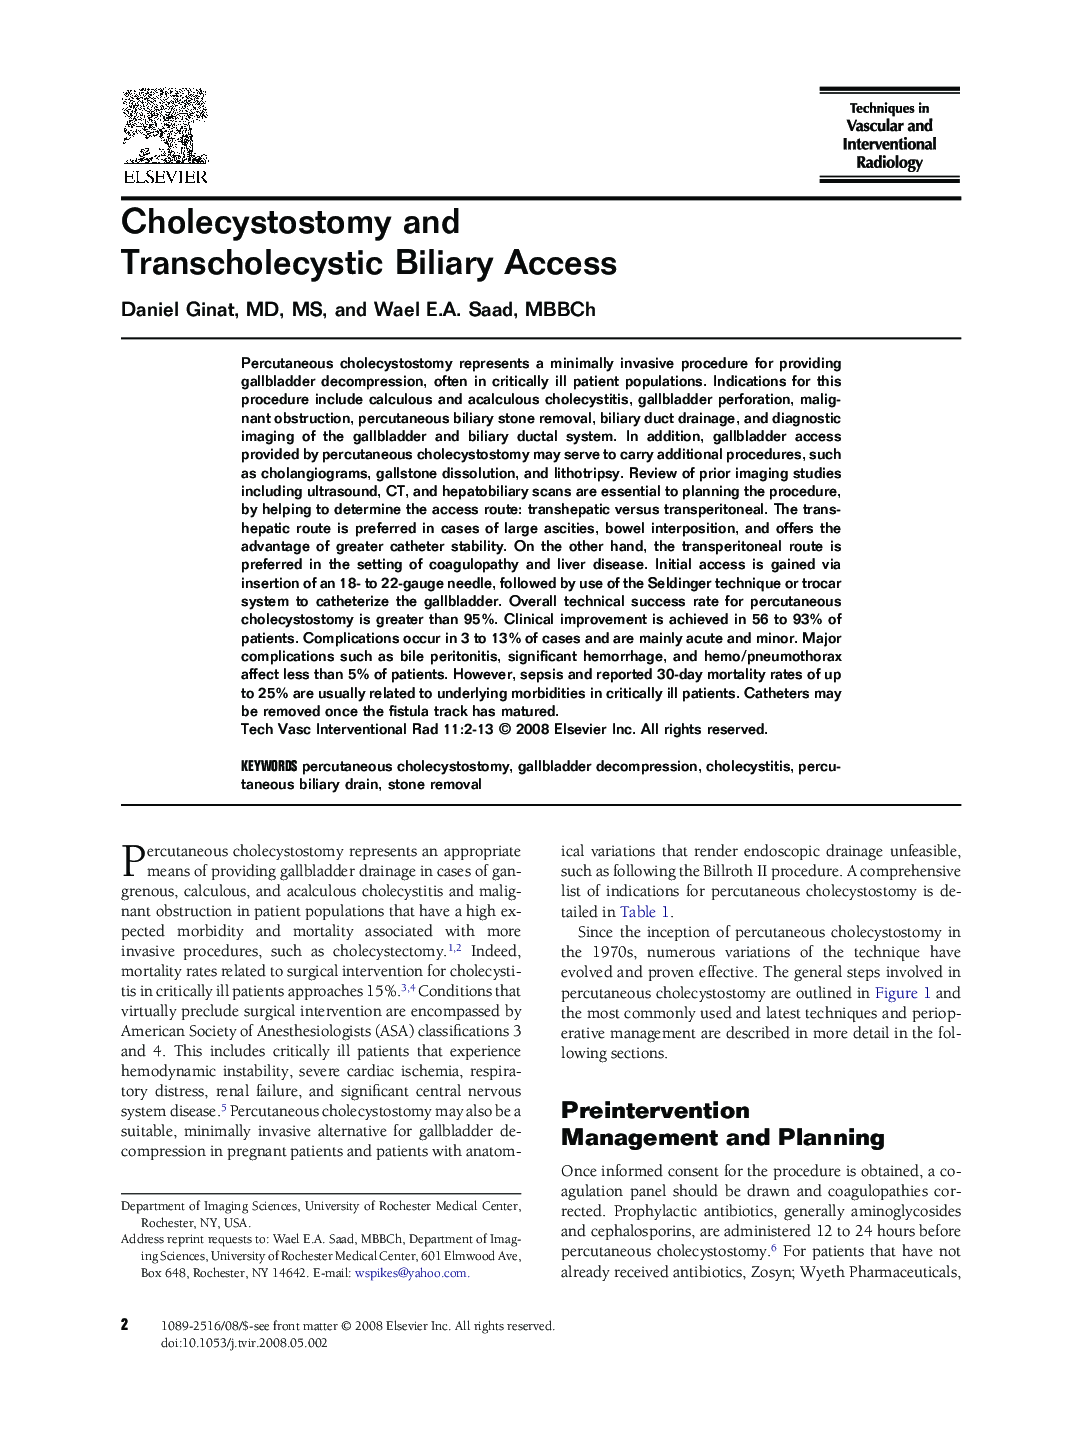 Cholecystostomy and Transcholecystic Biliary Access